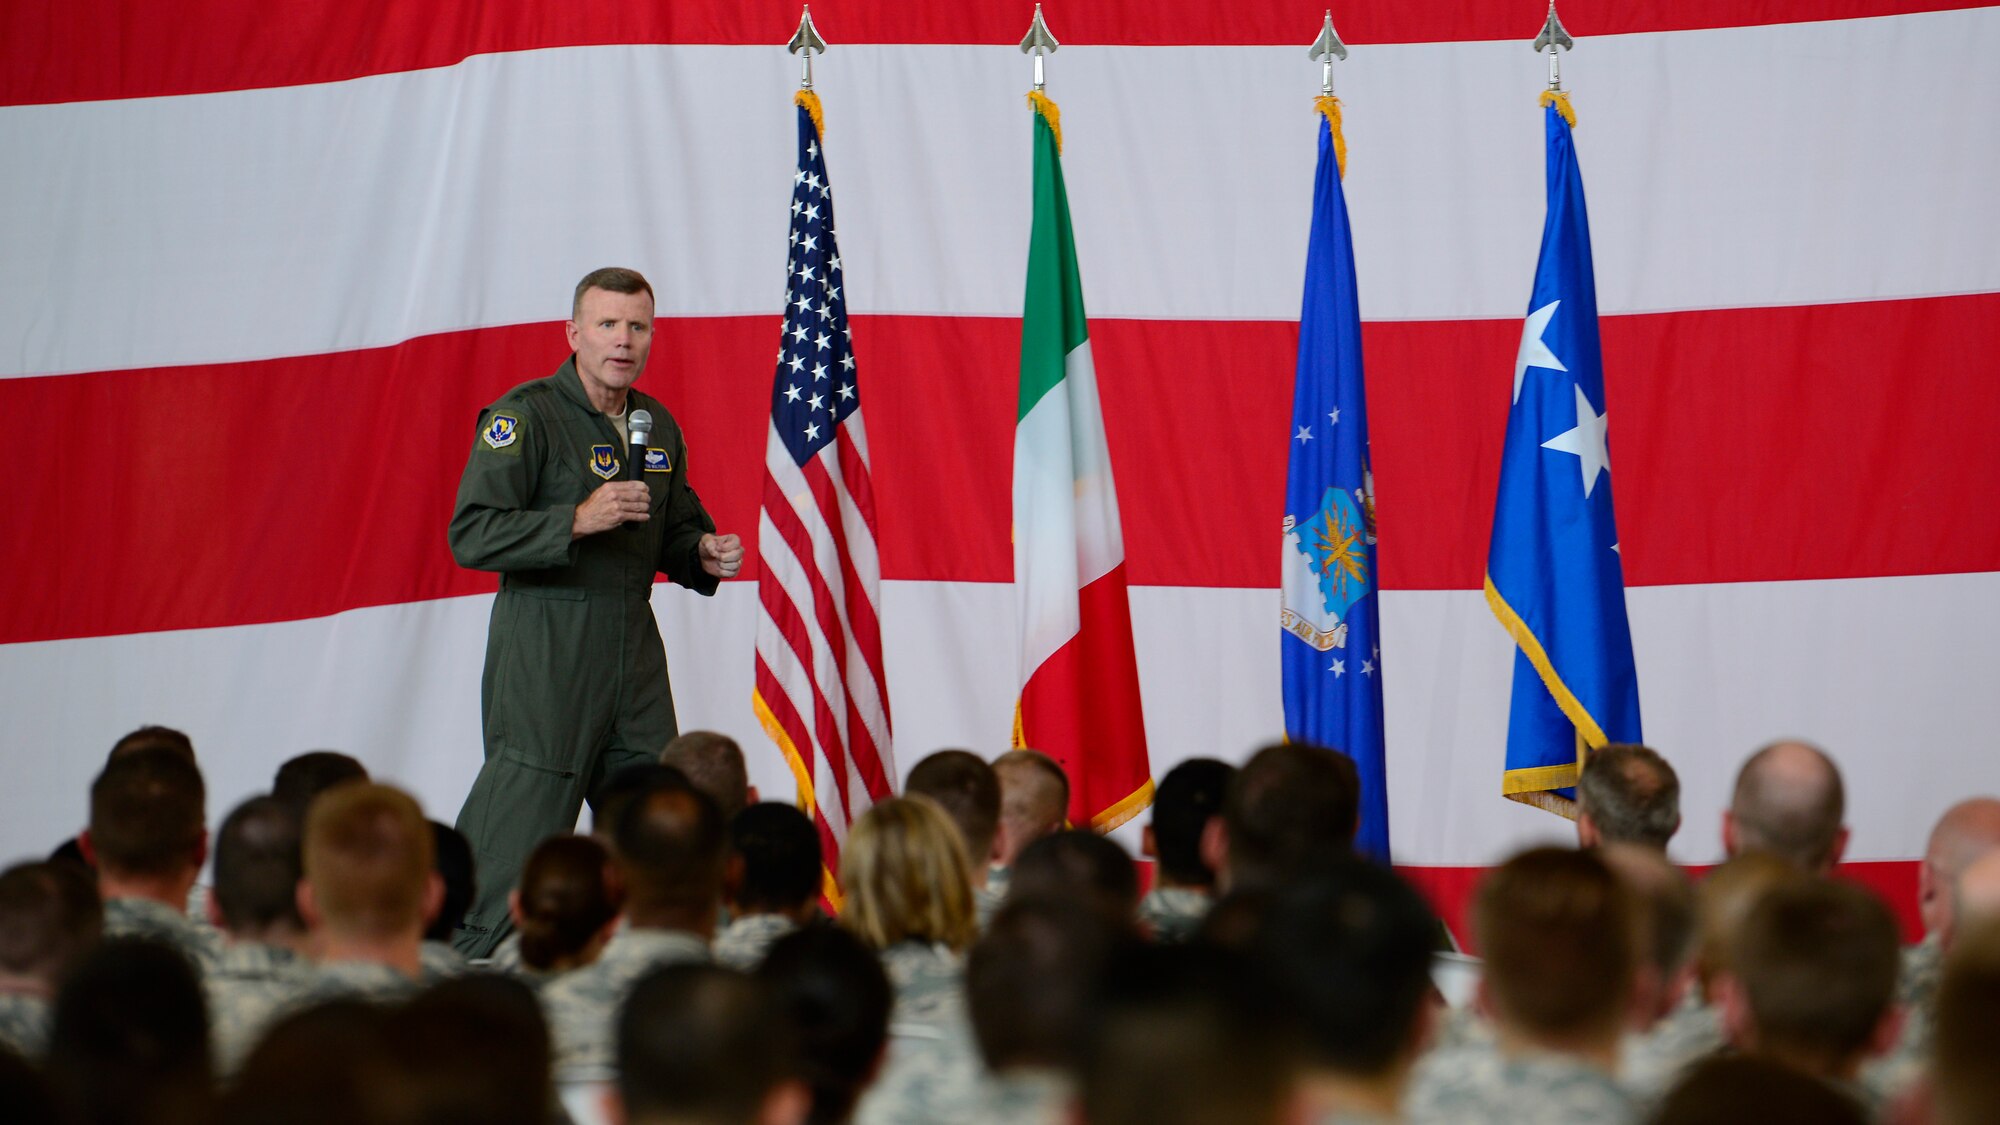 Gen. Tod D. Wolters, U.S. Air Forces in Europe and Air Forces Africa commander, speaks with Airmen at an all call during his visit to Aviano Air Base, Italy, July 23, 2018. Wolters met with Team Aviano members to express his gratitude for the hard work and dedication the wing gives toward defending U.S. and NATO interests and to remind Airmen to take time for themselves and their families. (U.S. Air Force photo by Staff Sgt. Cary Smith)